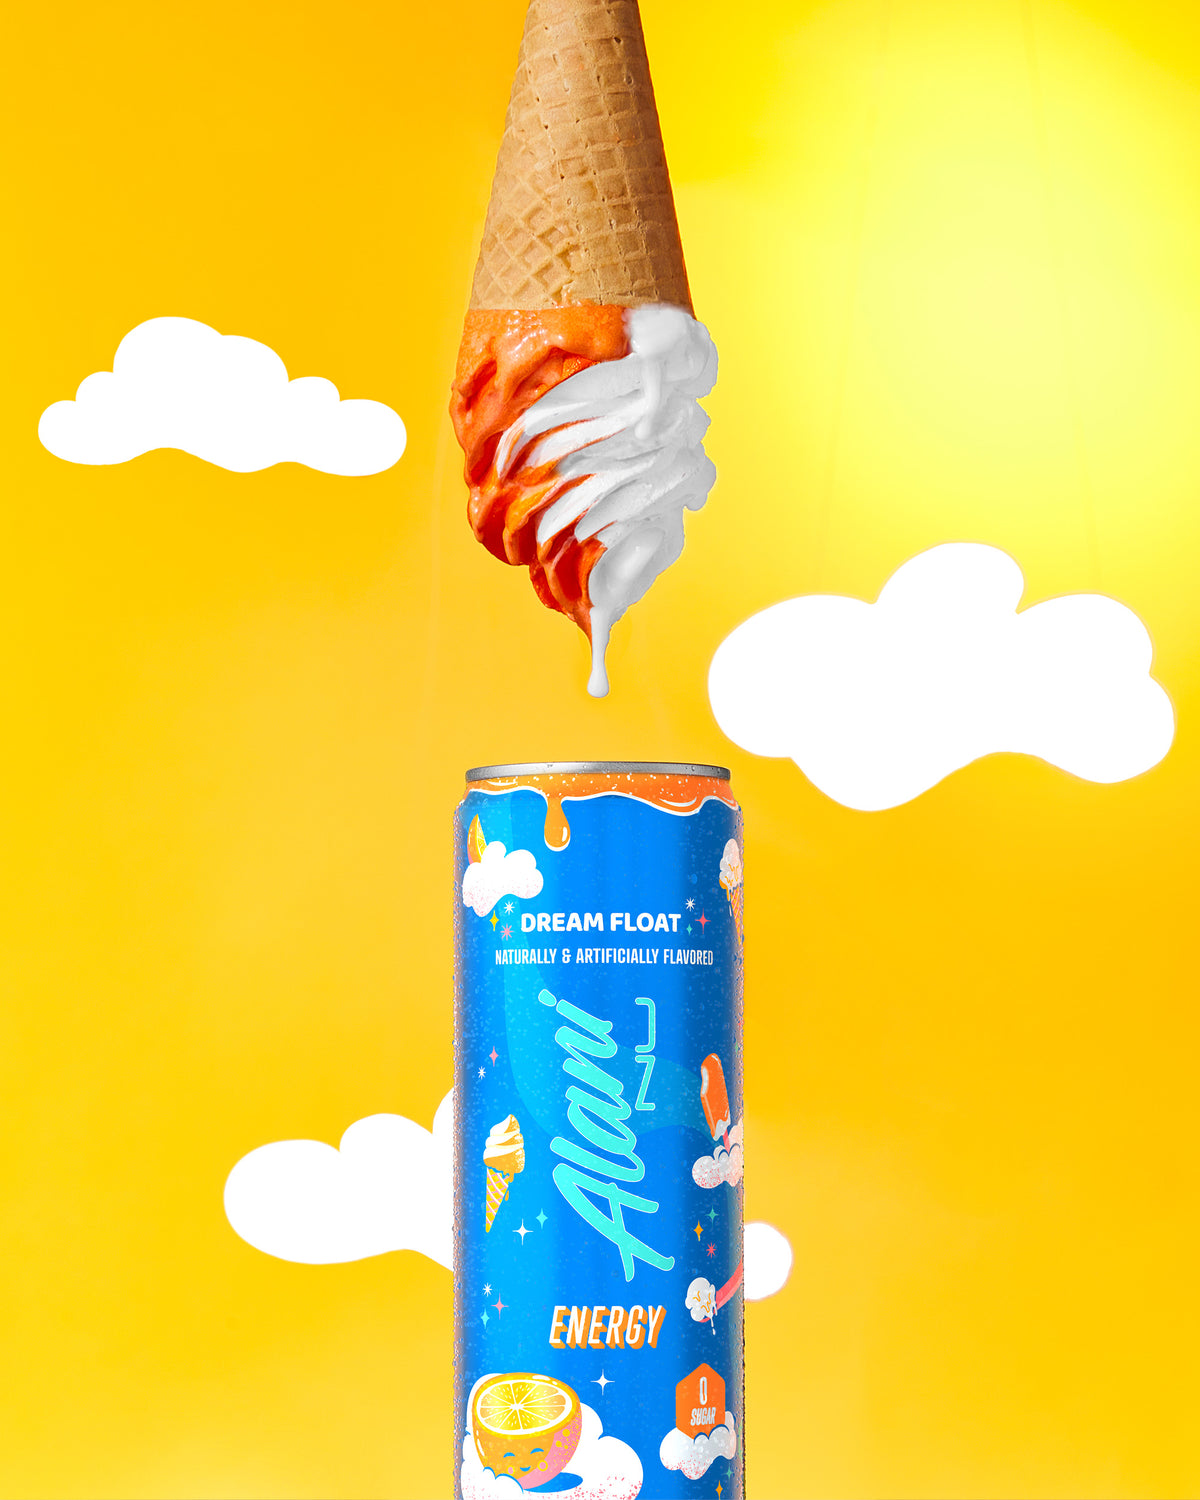 A energy drink in Dream Float flavor displayed next to a cone in upside down from the energy drink.